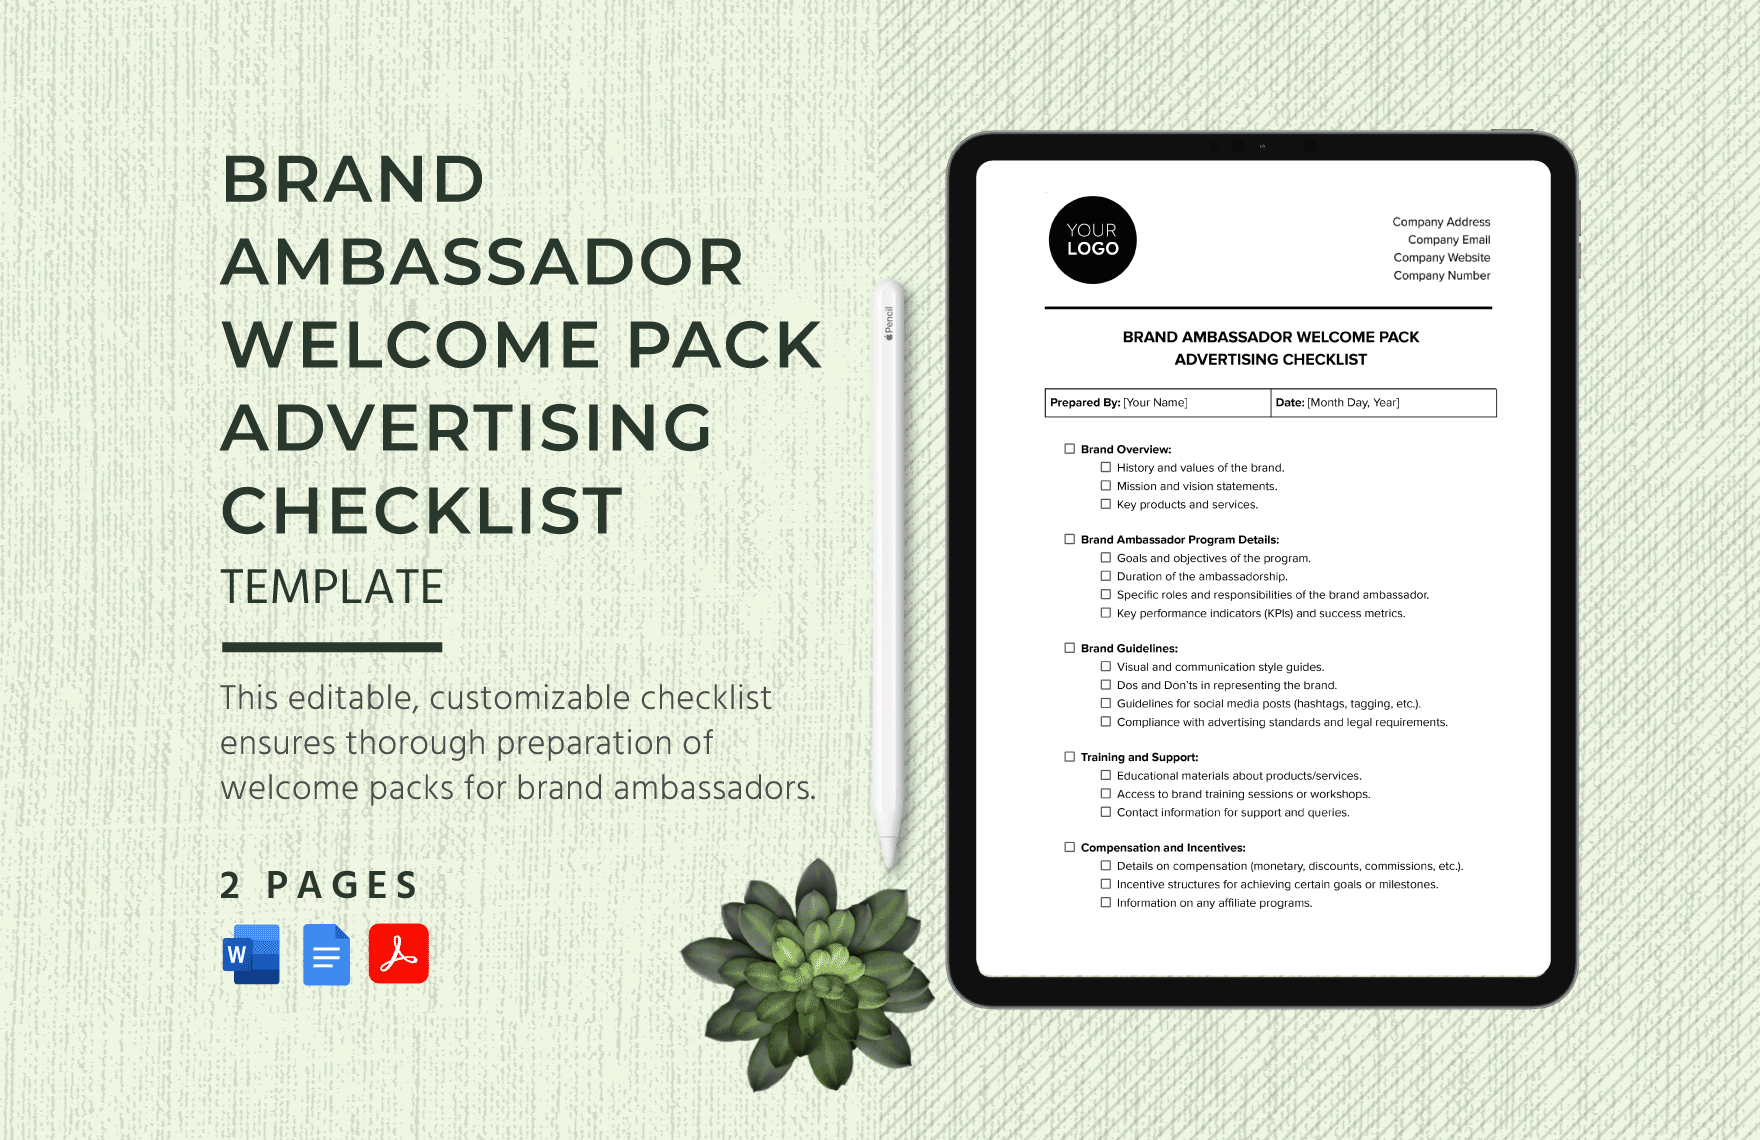 Brand Ambassador Welcome Pack Advertising Checklist Template in Word, Google Docs, PDF